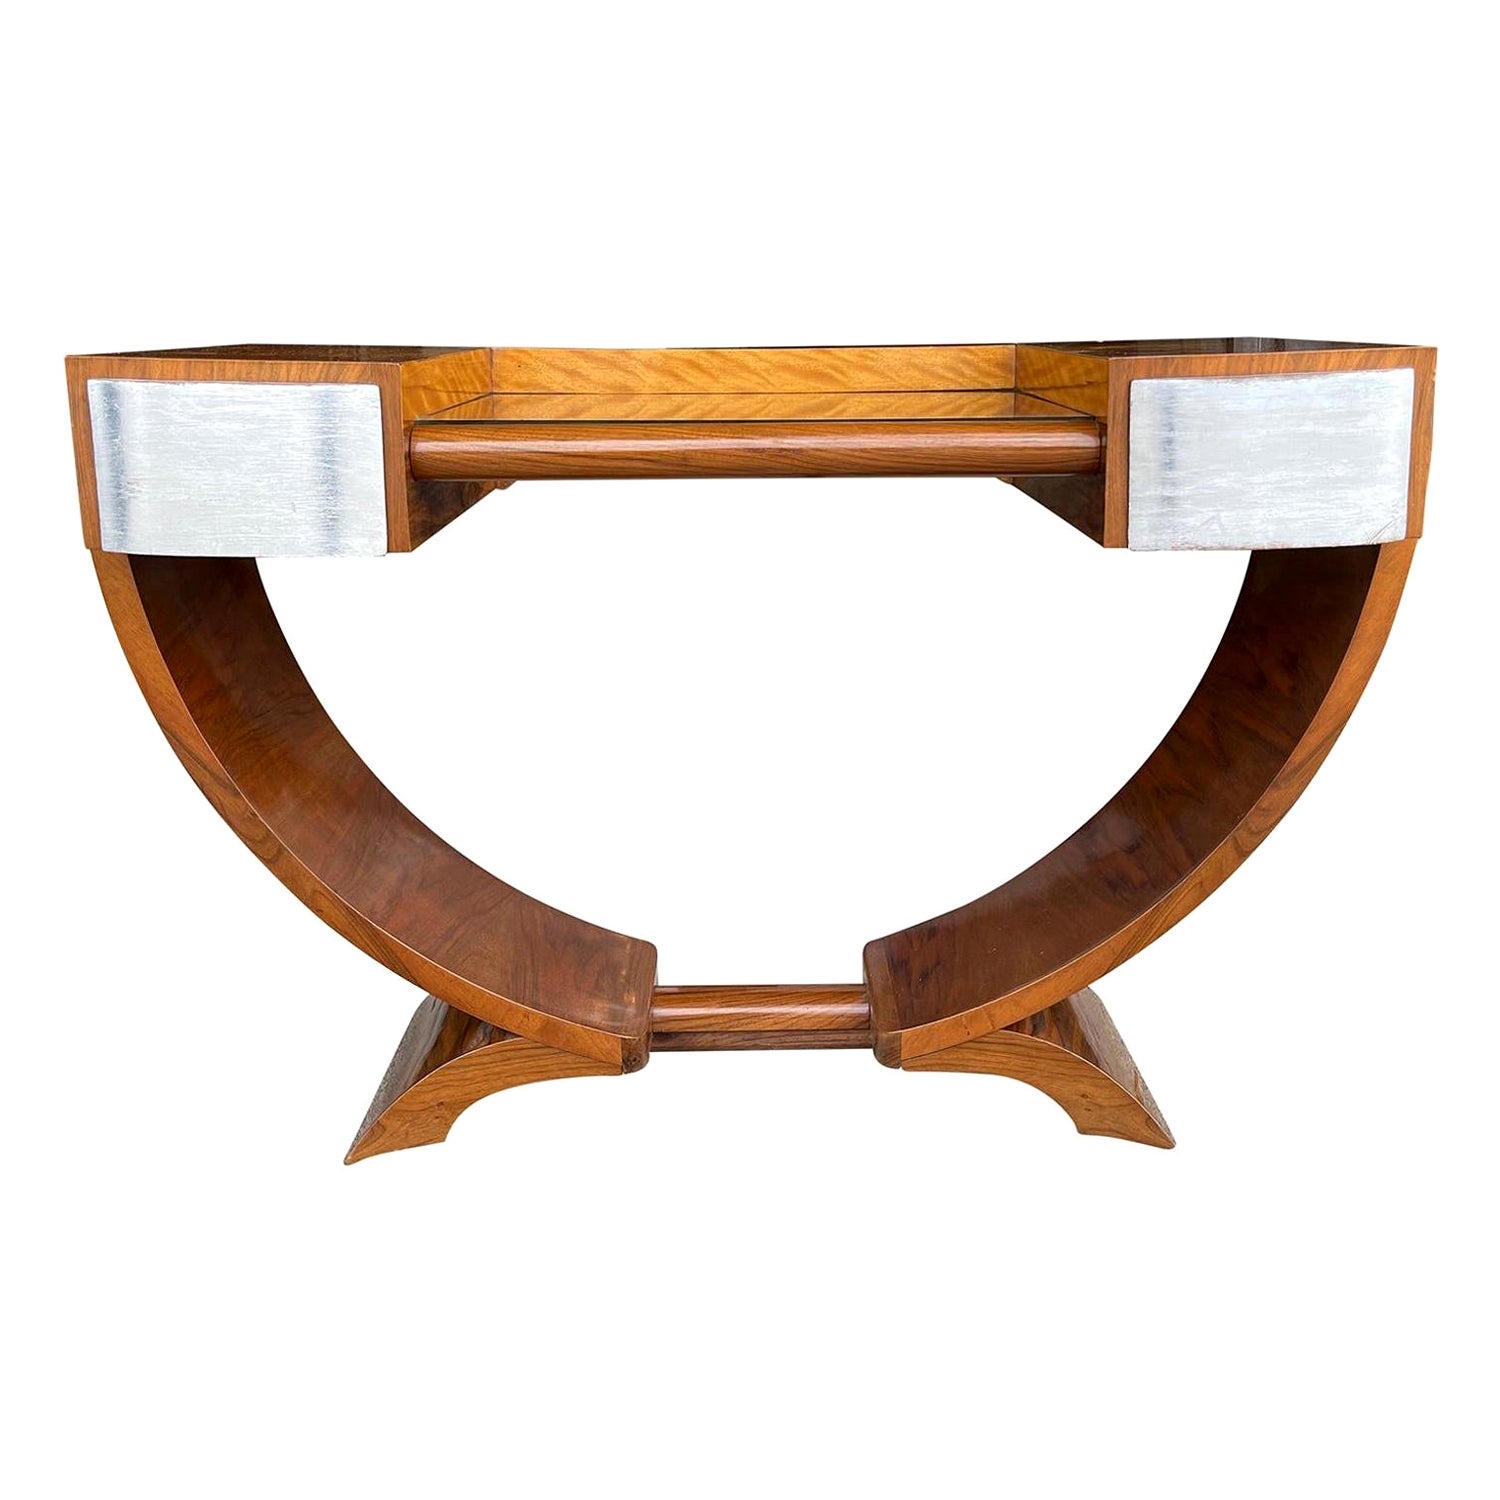 20th Century French Art Deco Walnut Coiffeuse Vanity by Émile-Jacques Ruhlmann